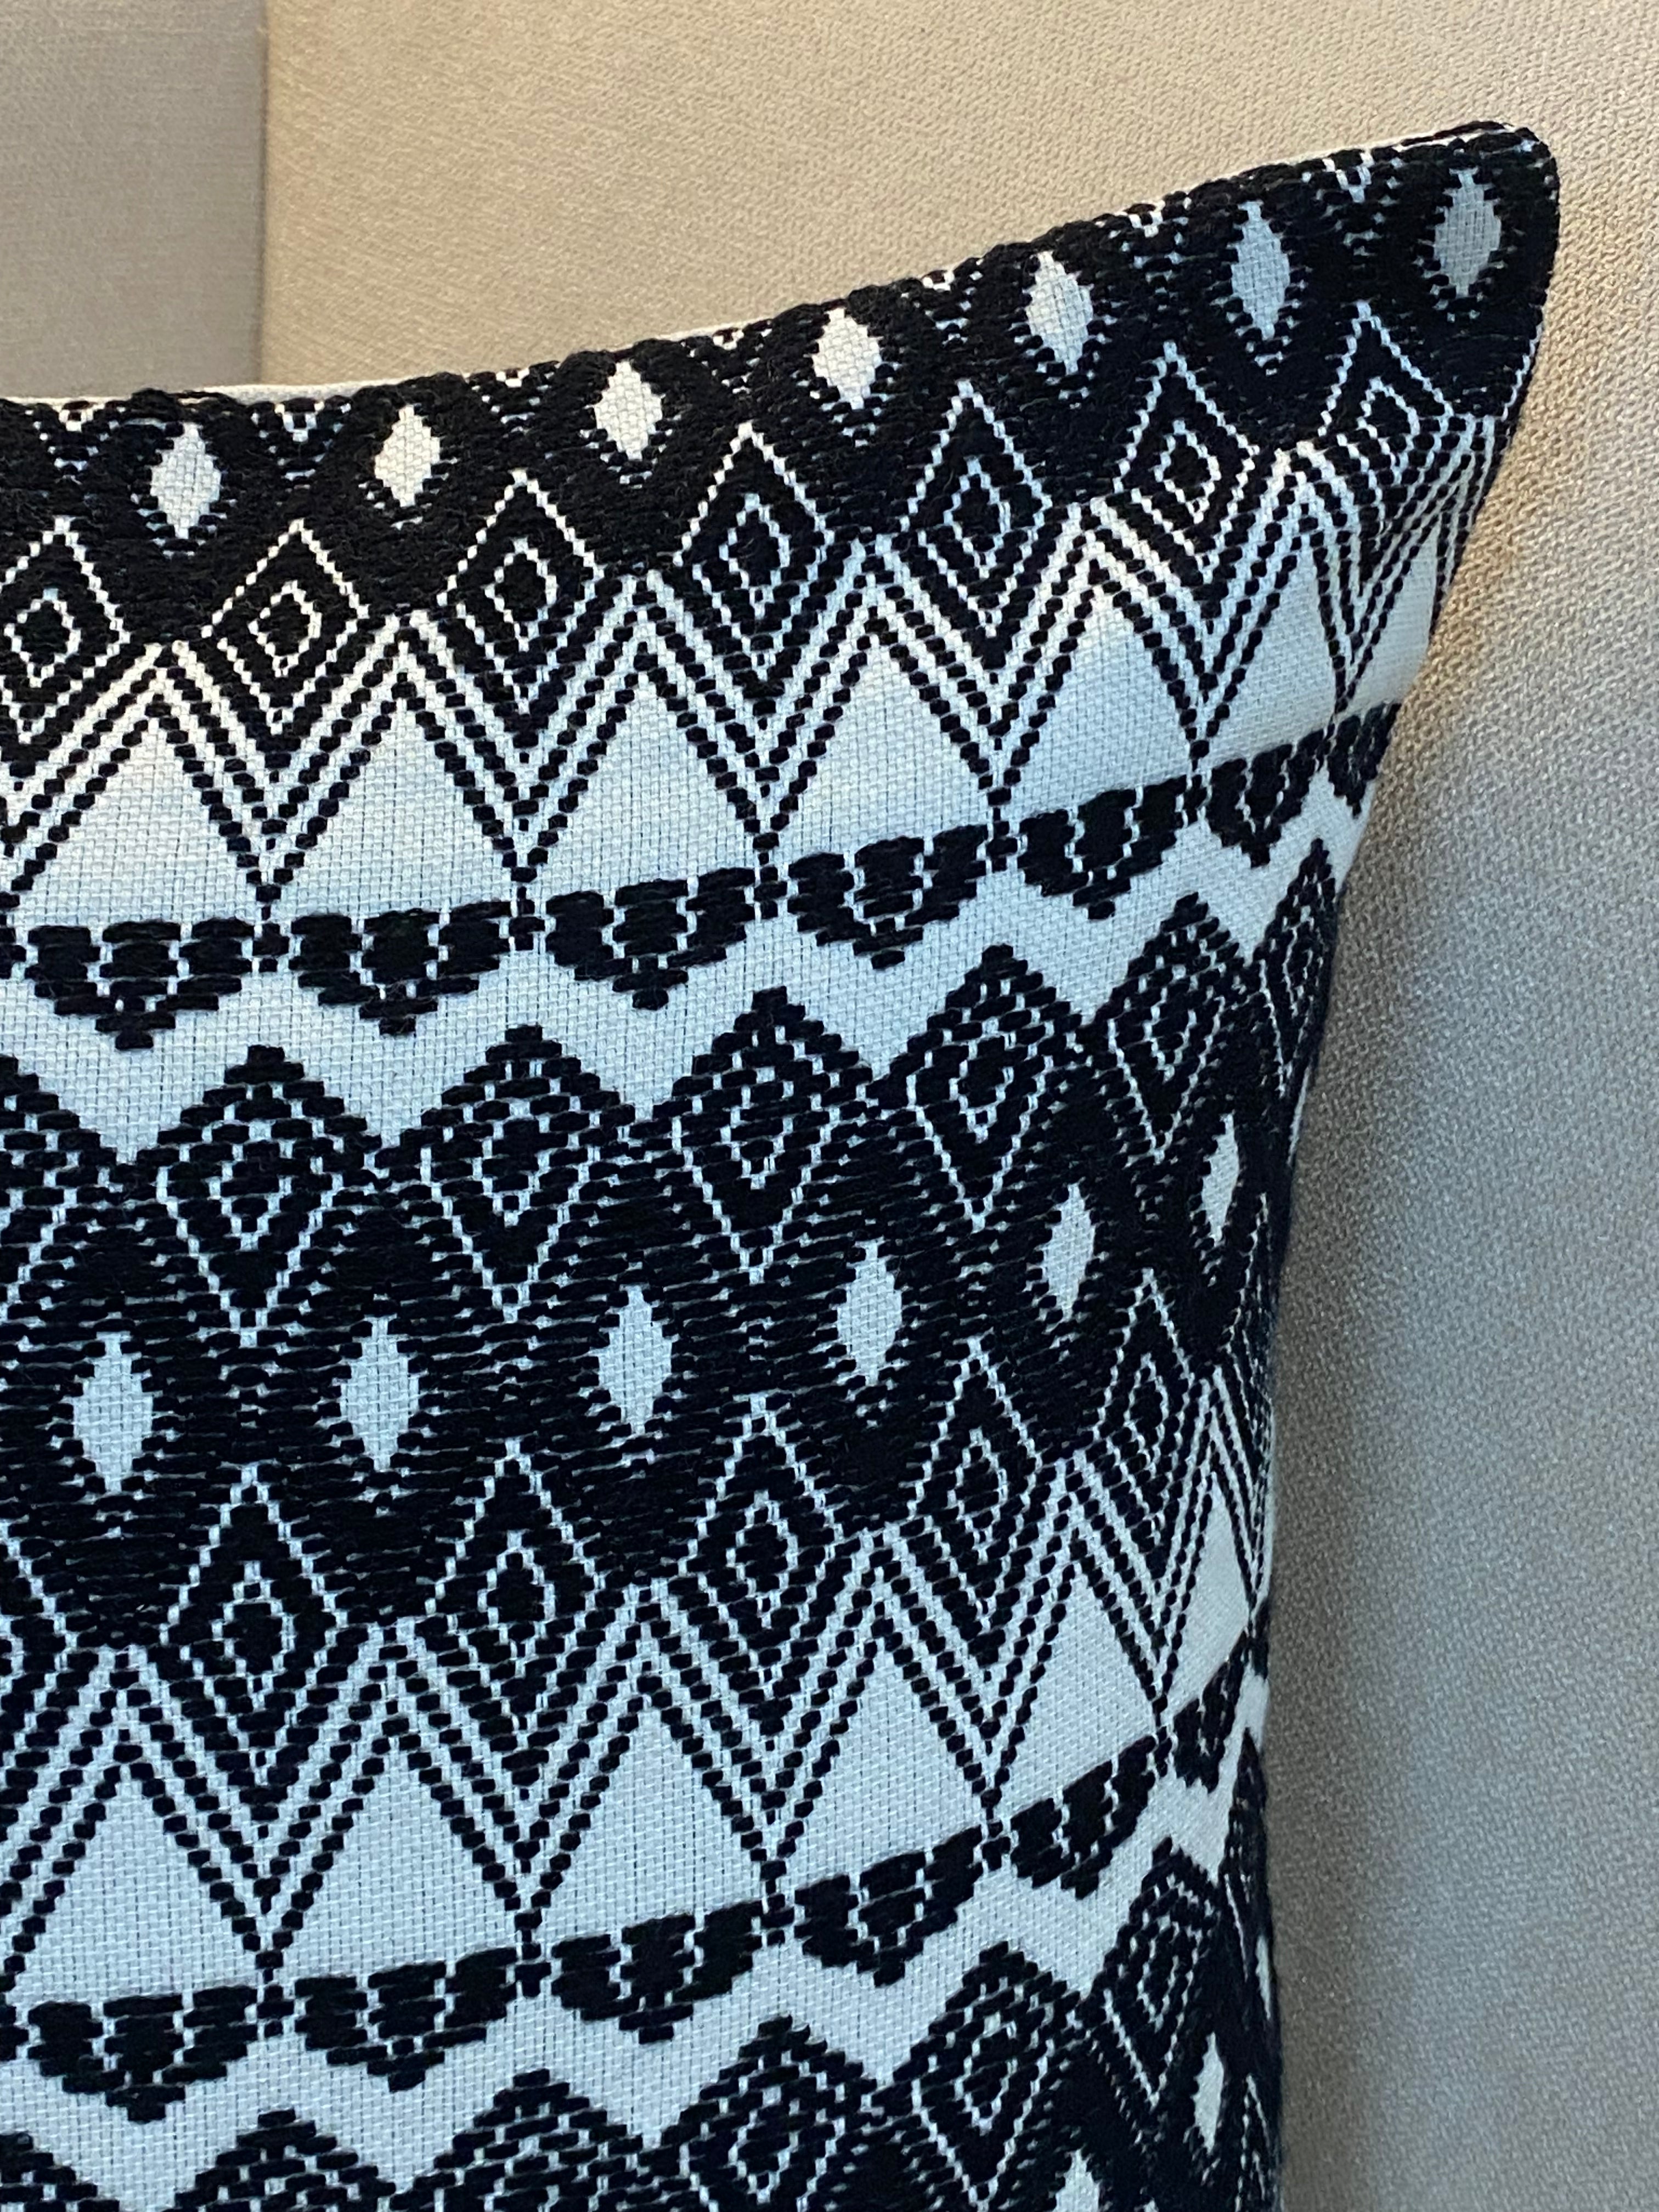 Jacquard Hand Woven Cushion Cover- 16*16 inches